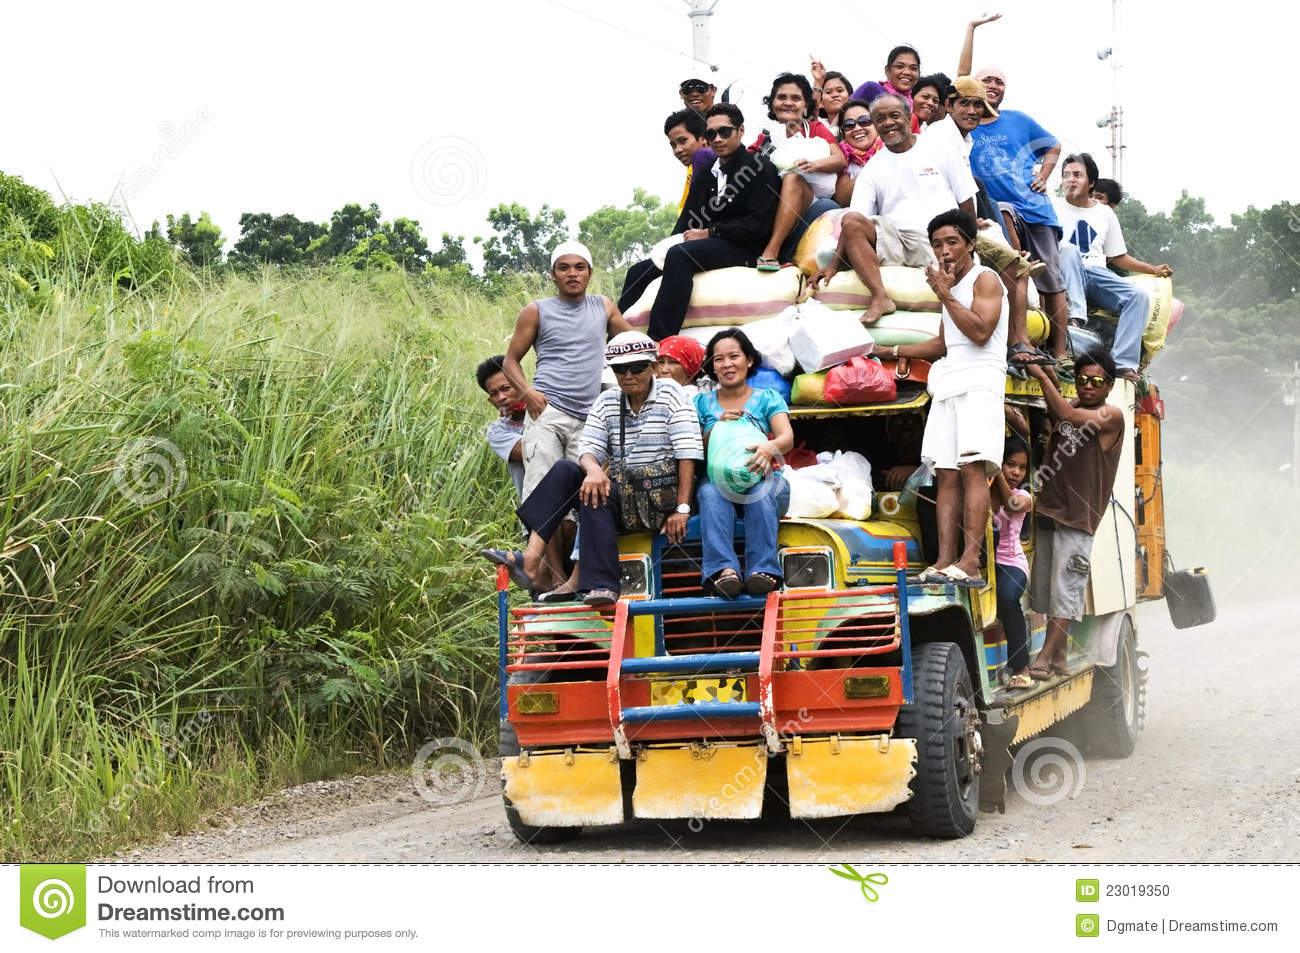 Picture Of People Enjoying The Jeepney Ride In The Philippines